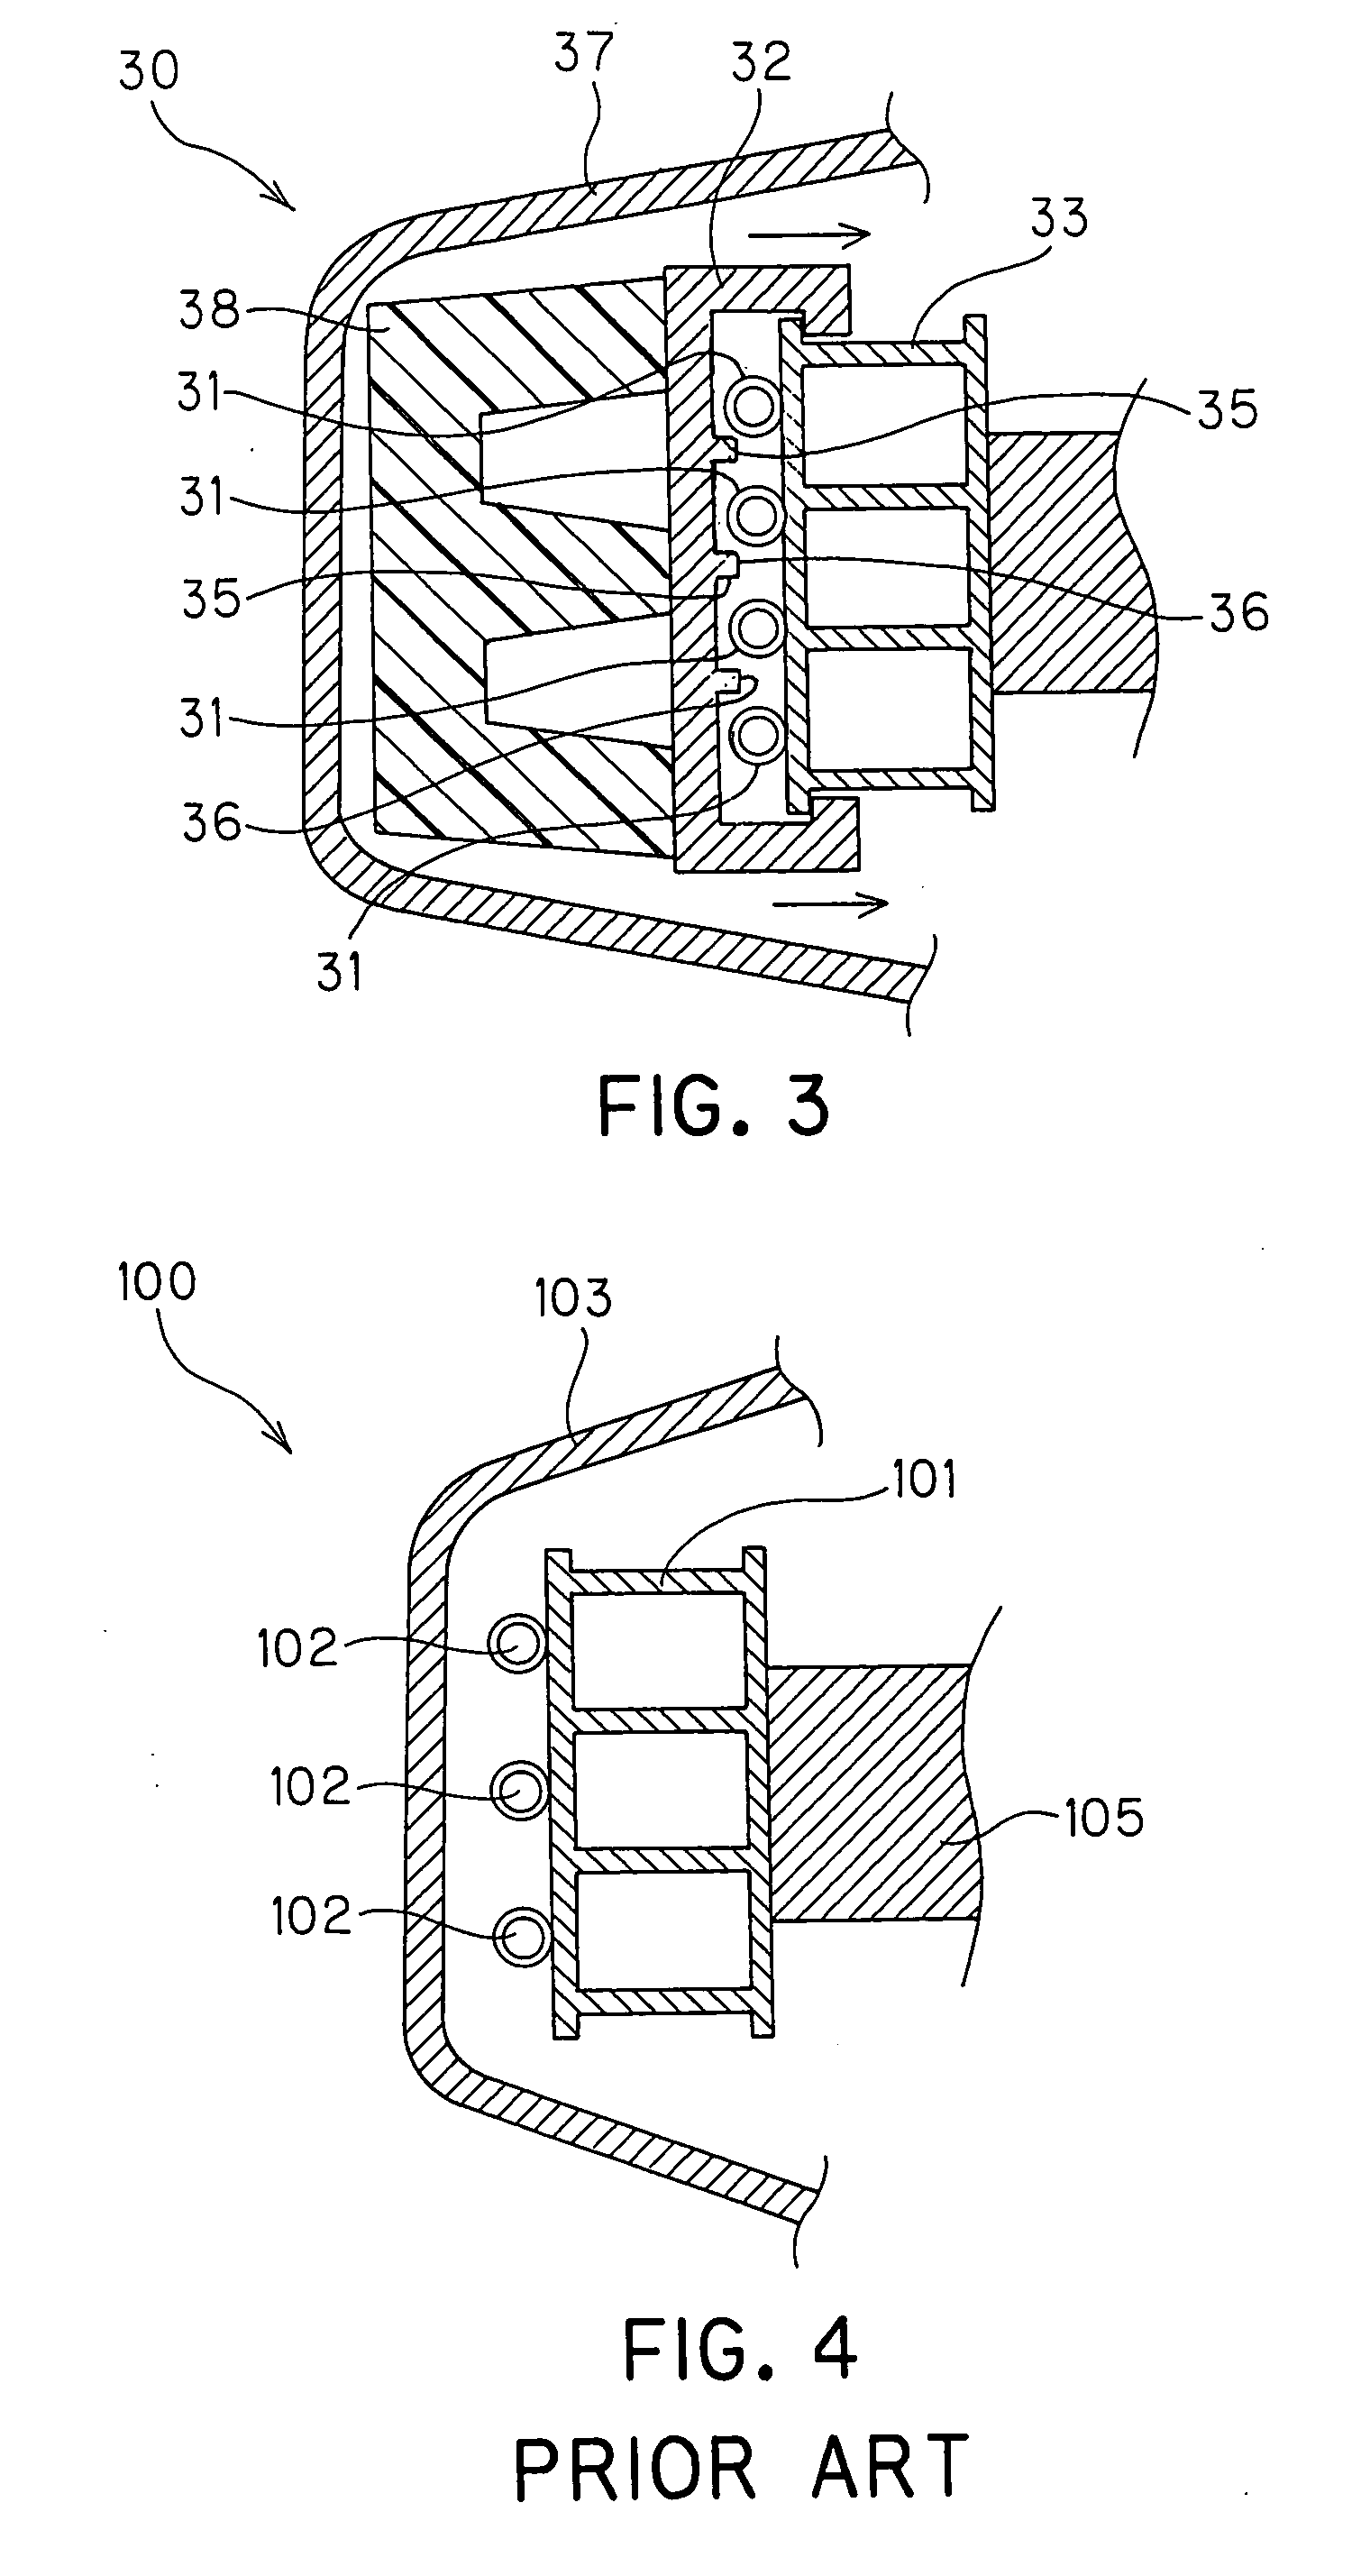 Load sensing device for automobiles